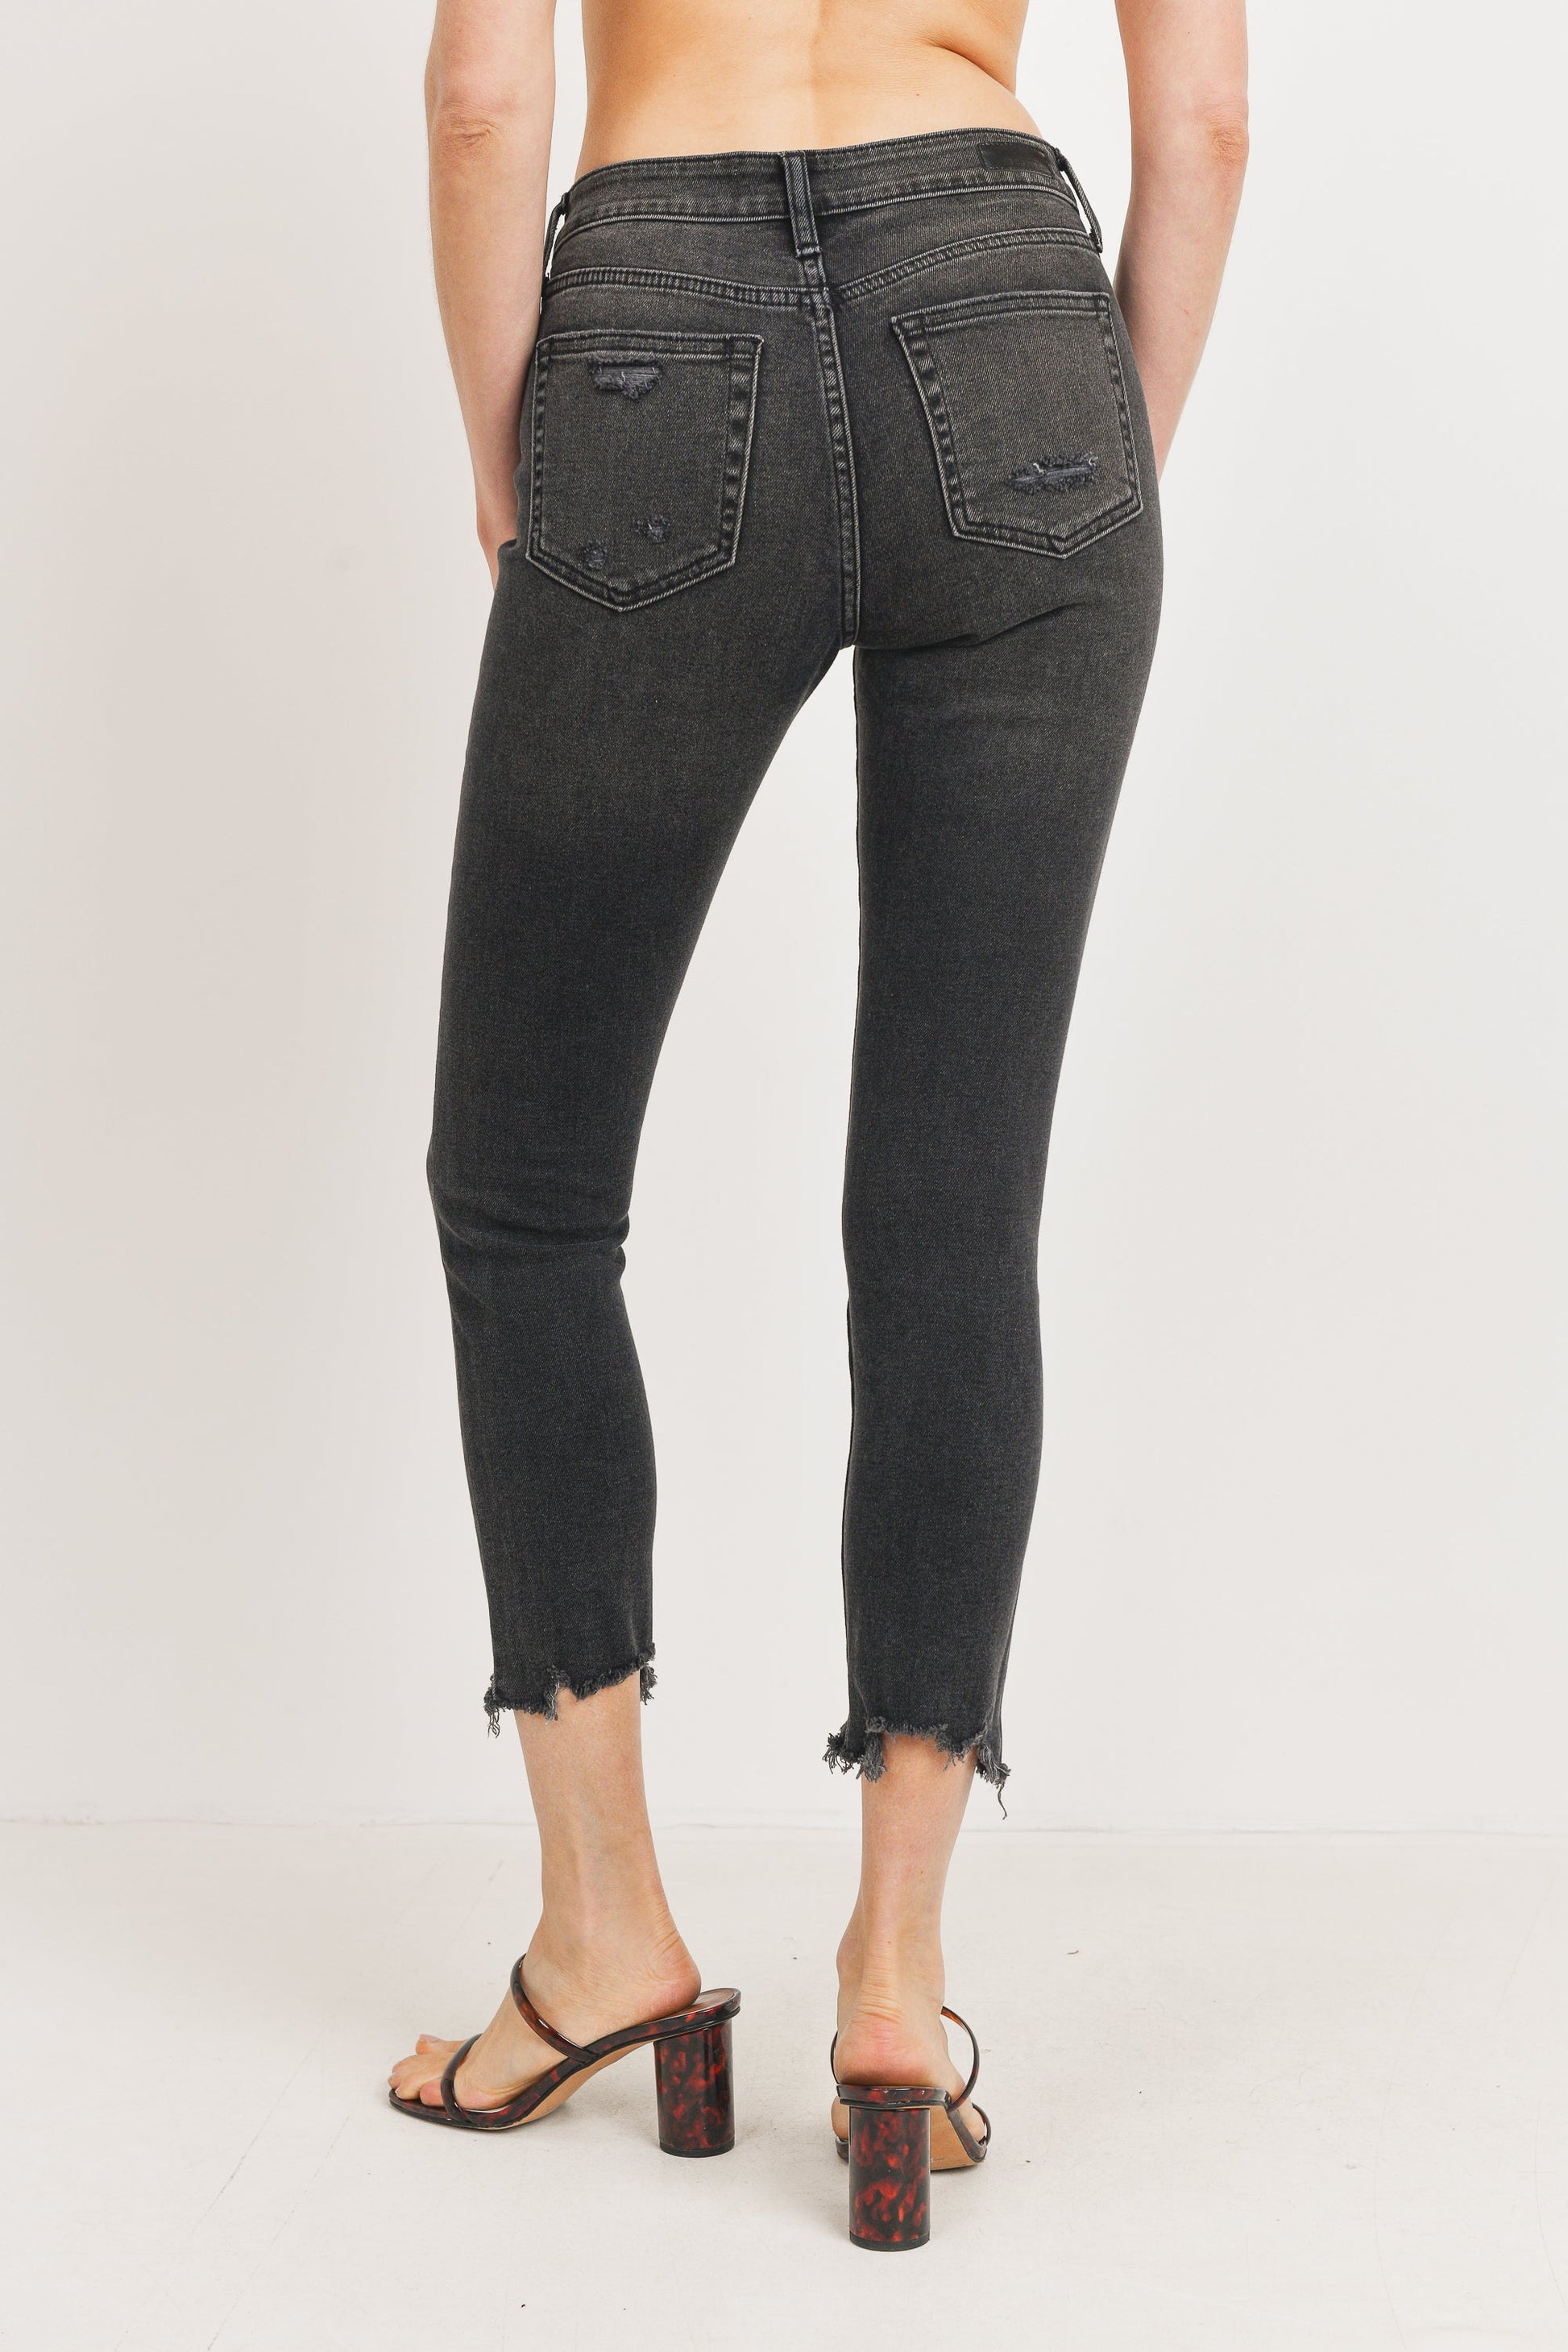 Stretch Skinny Jeans: Form-fitting denim pants with added stretch for comfort and a sleek, modern silhouette.